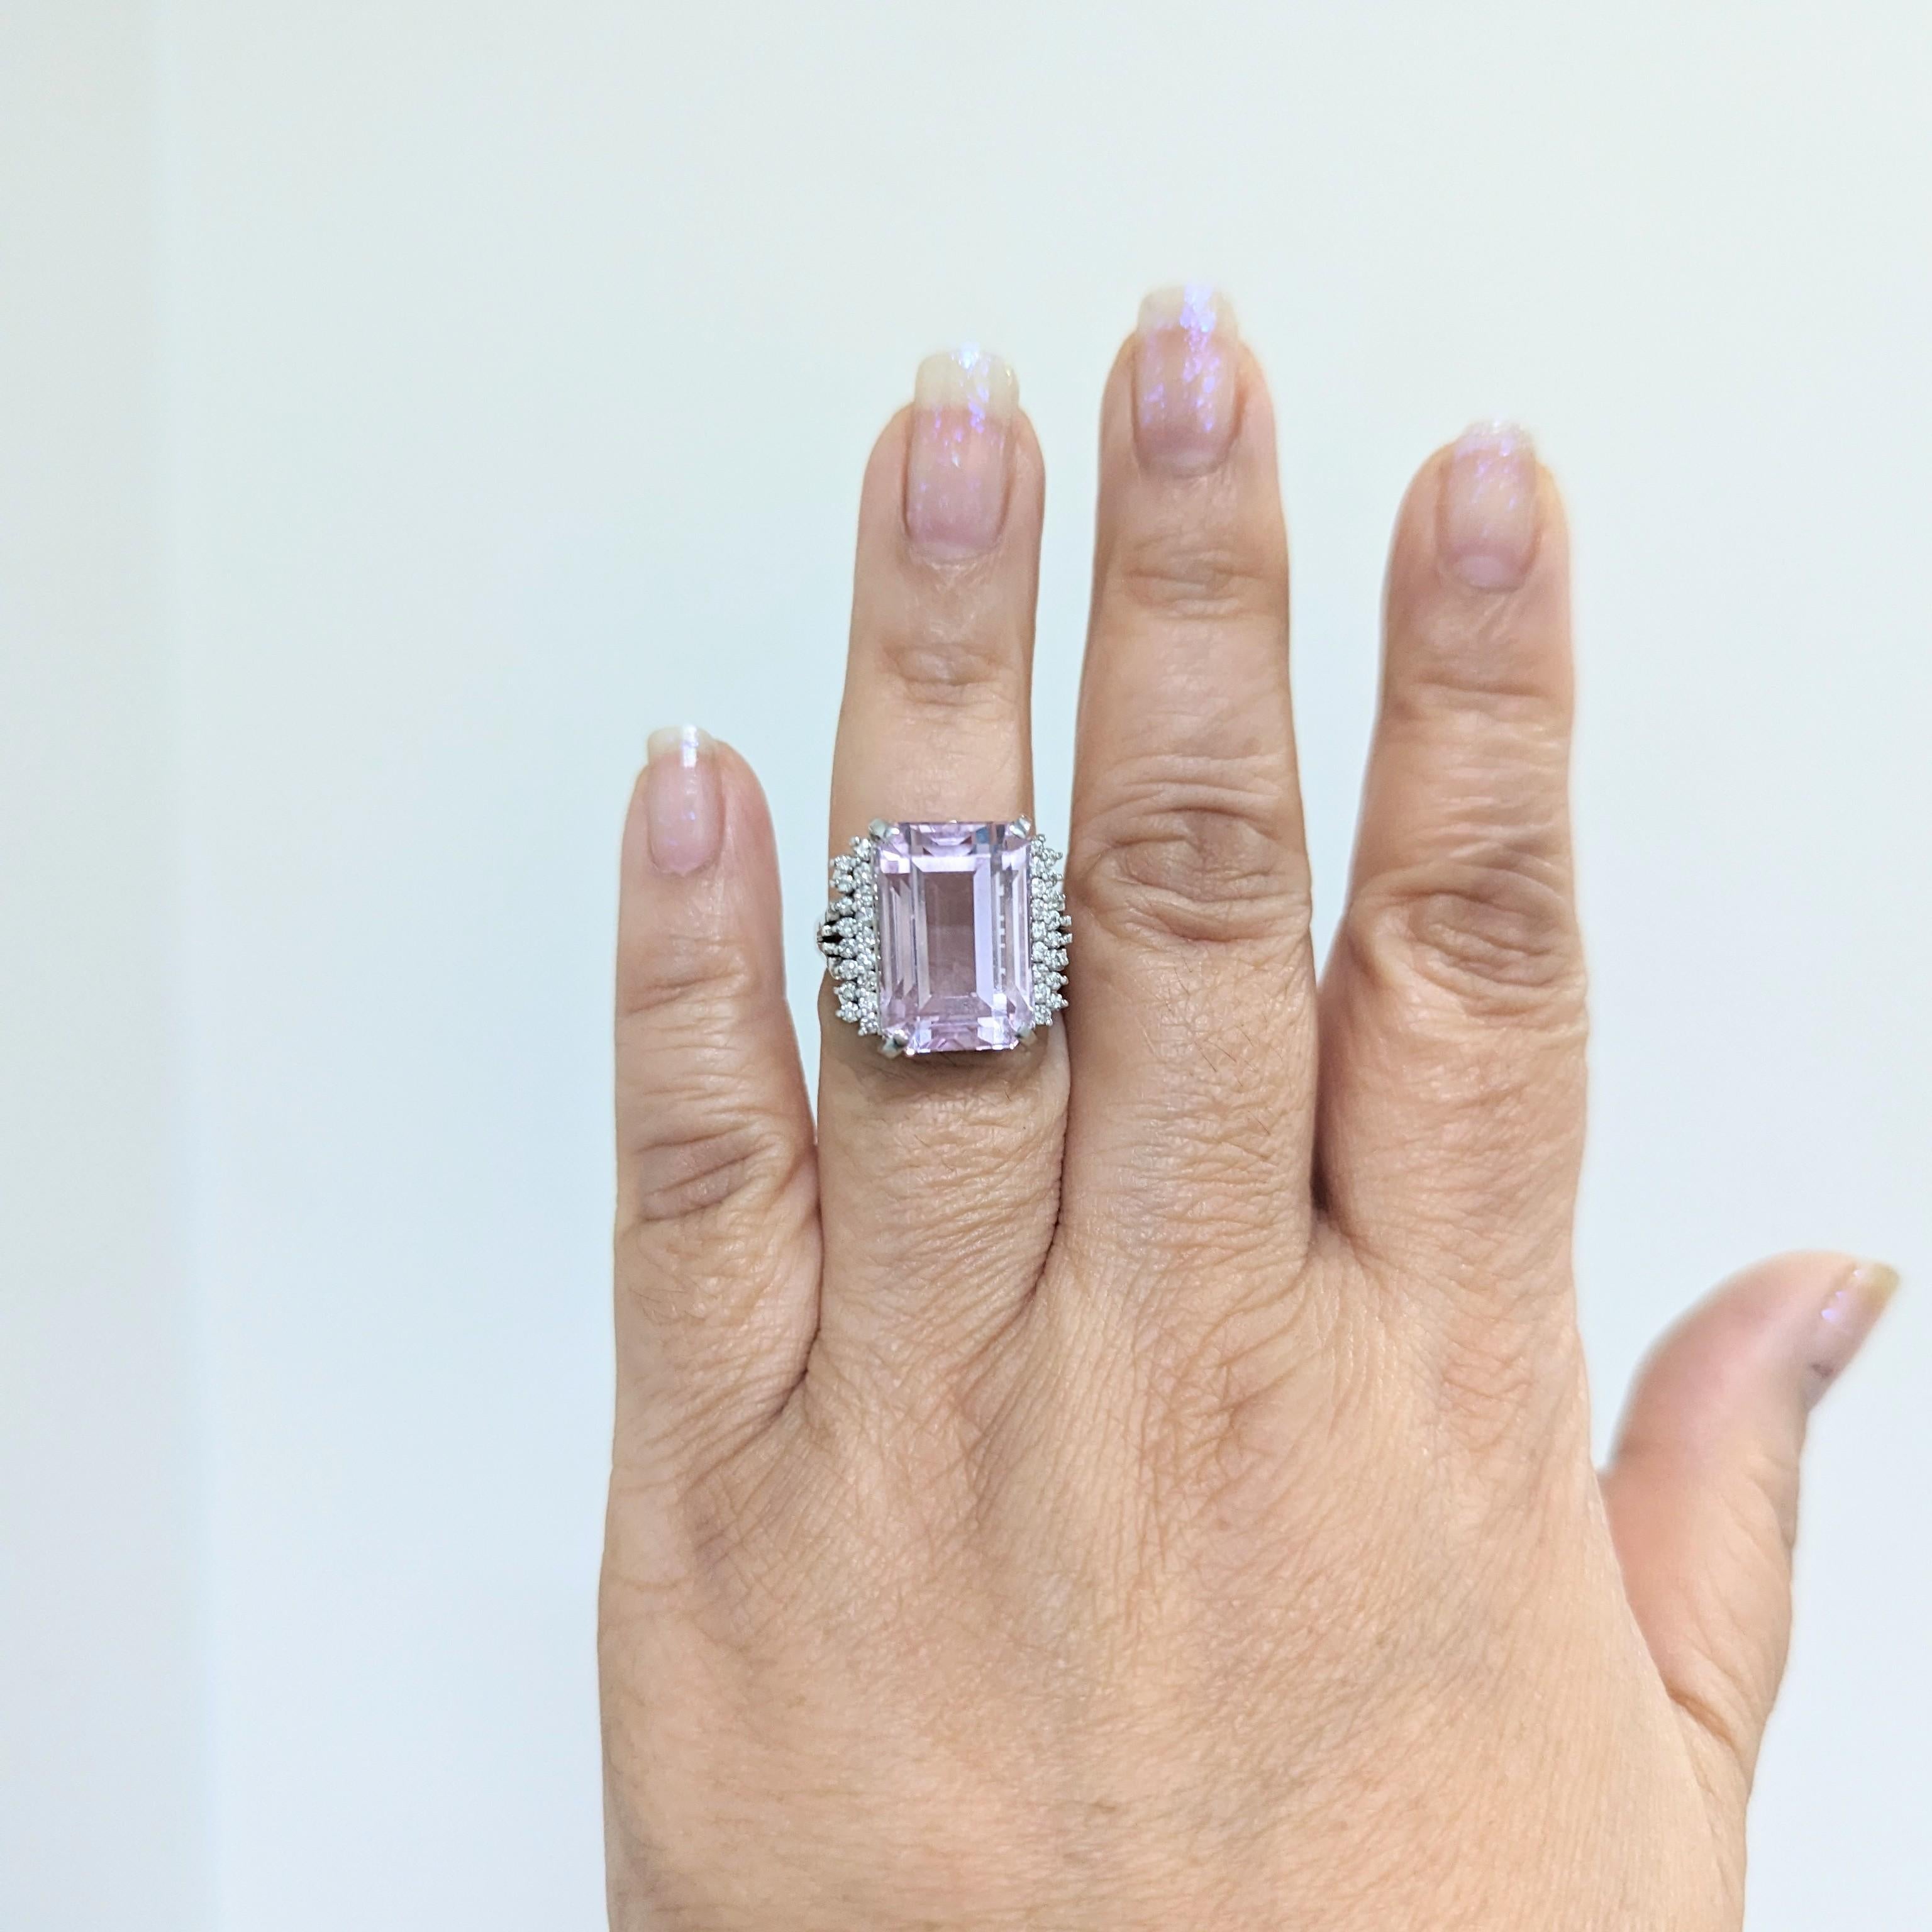 Beautiful 22.65 ct. pink kunzite emerald cut with 0.51 ct. good quality white diamond rounds.  Handmade in 18k white gold.  Ring size 7.5.